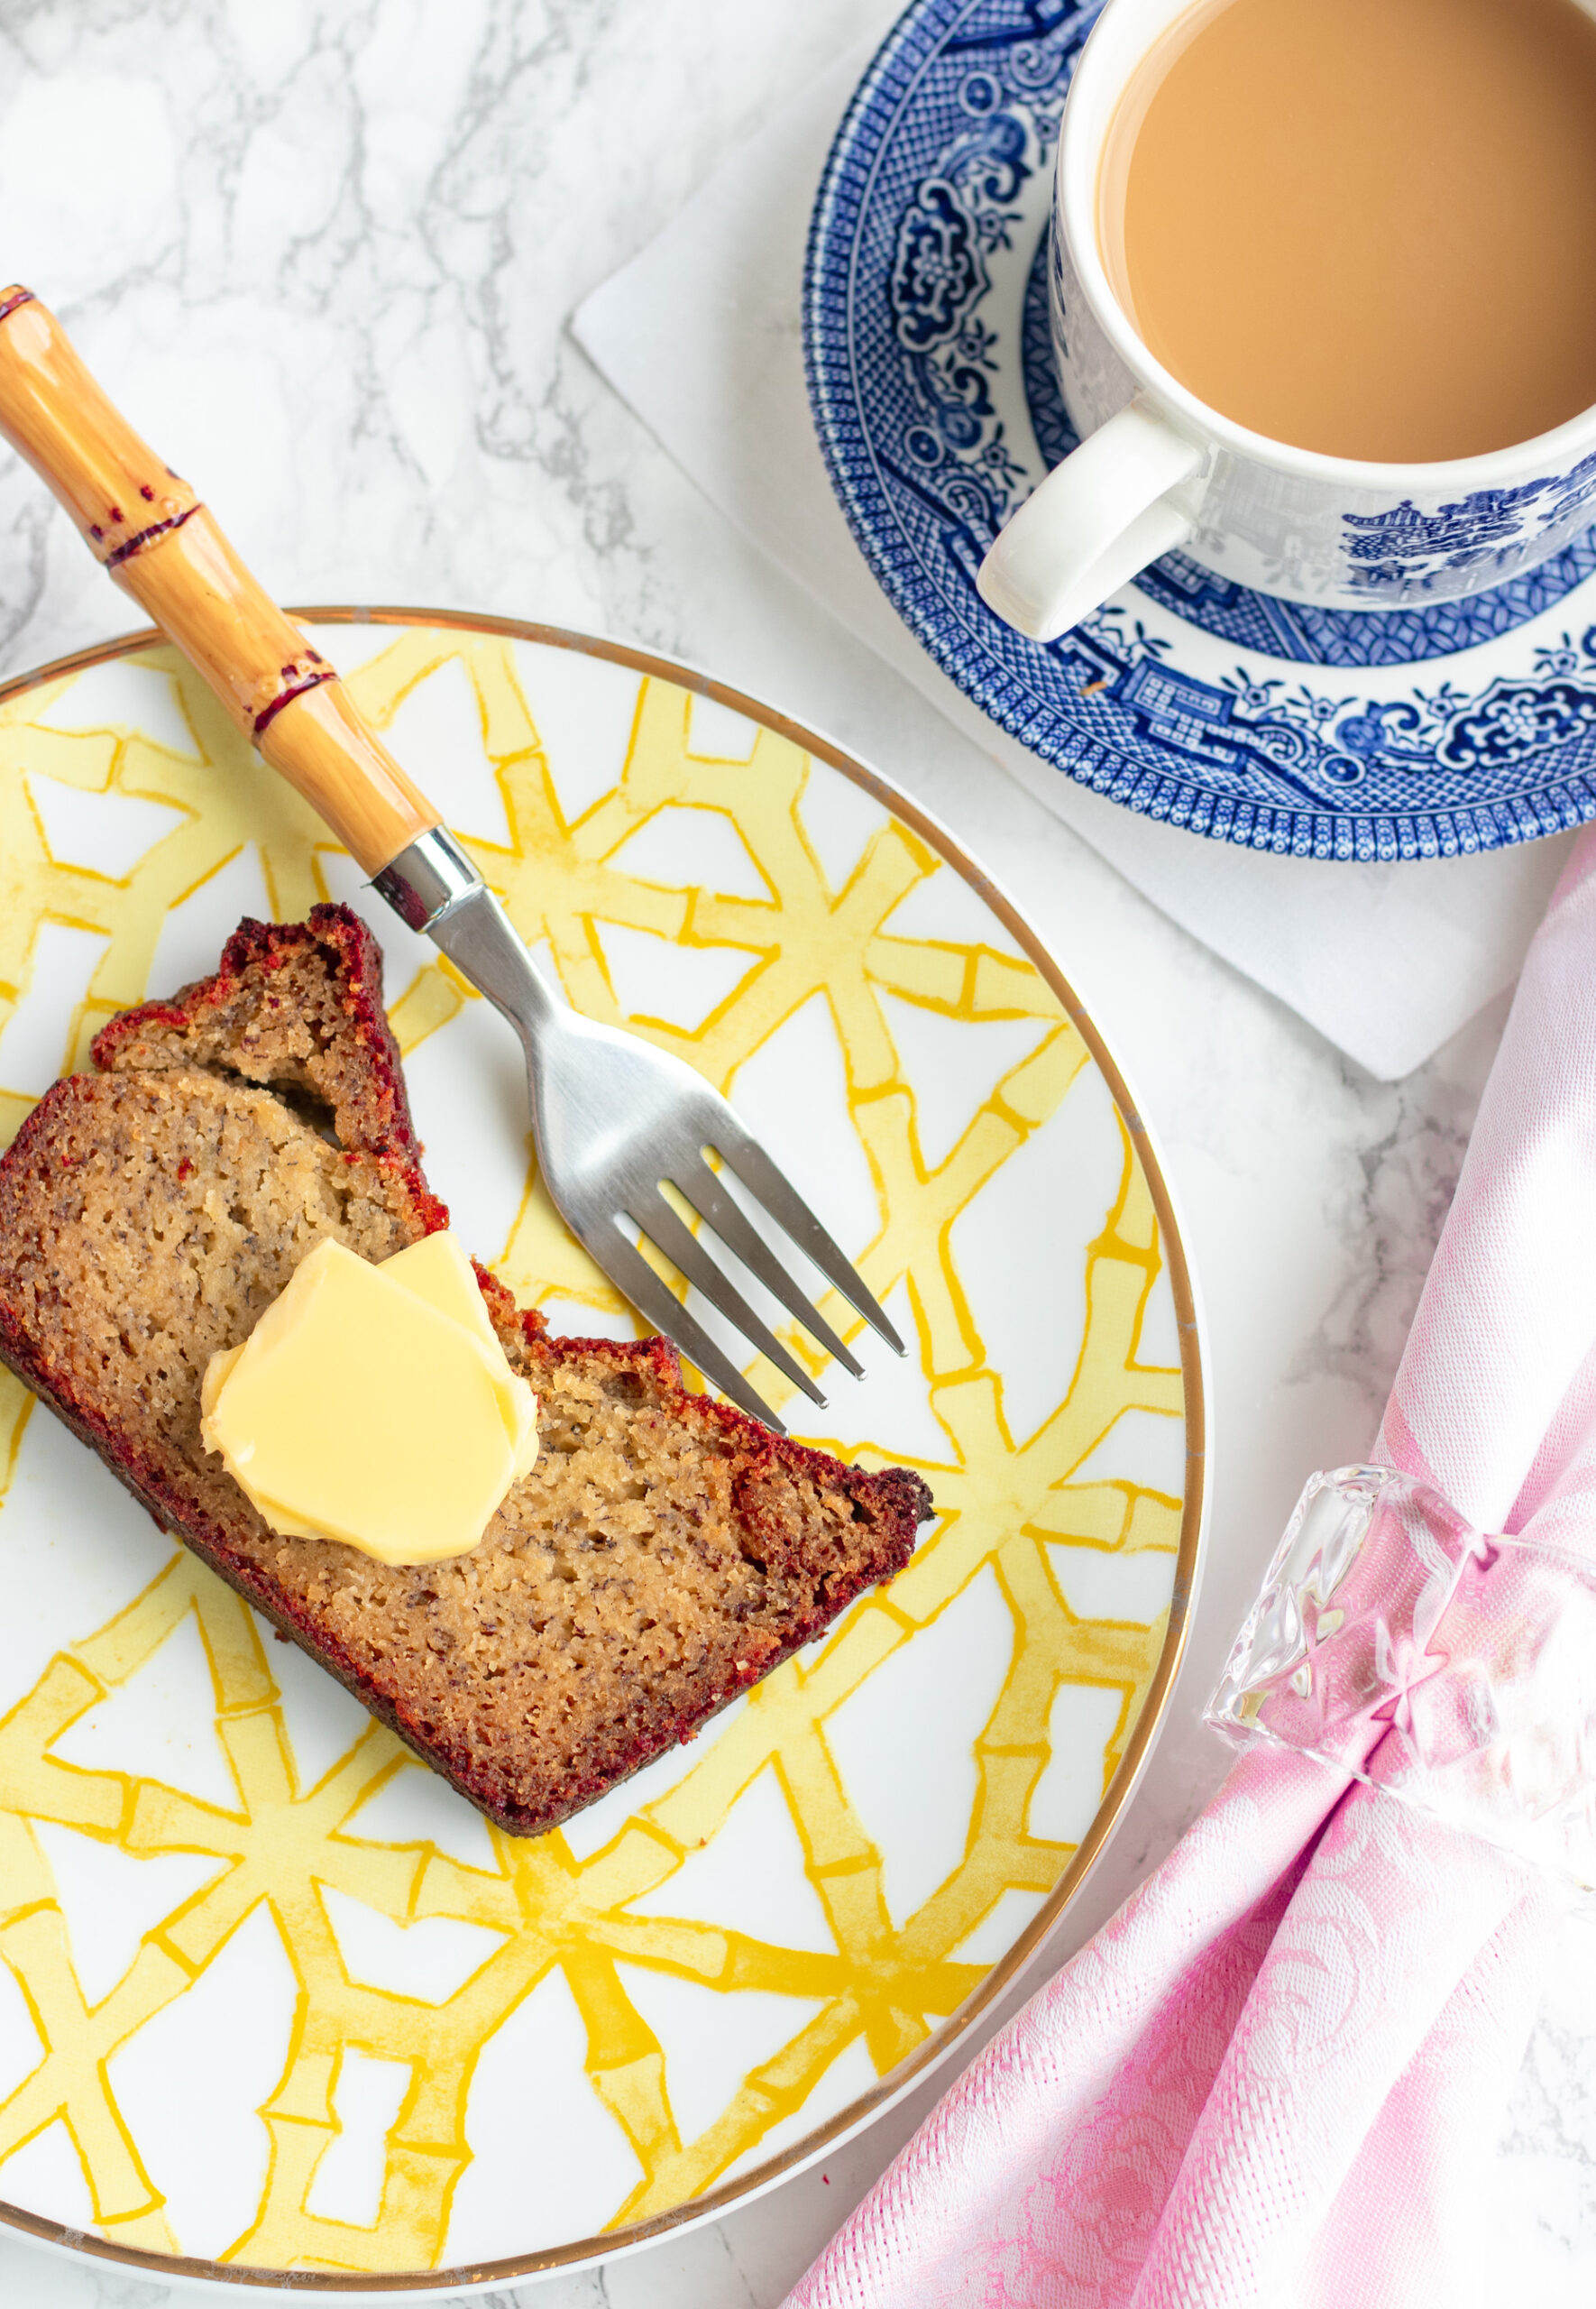 Gluten free banana bread made with real bananas is clean, healthy, and tastes just like the your odl favorite recipe minus the carbs and sugar.